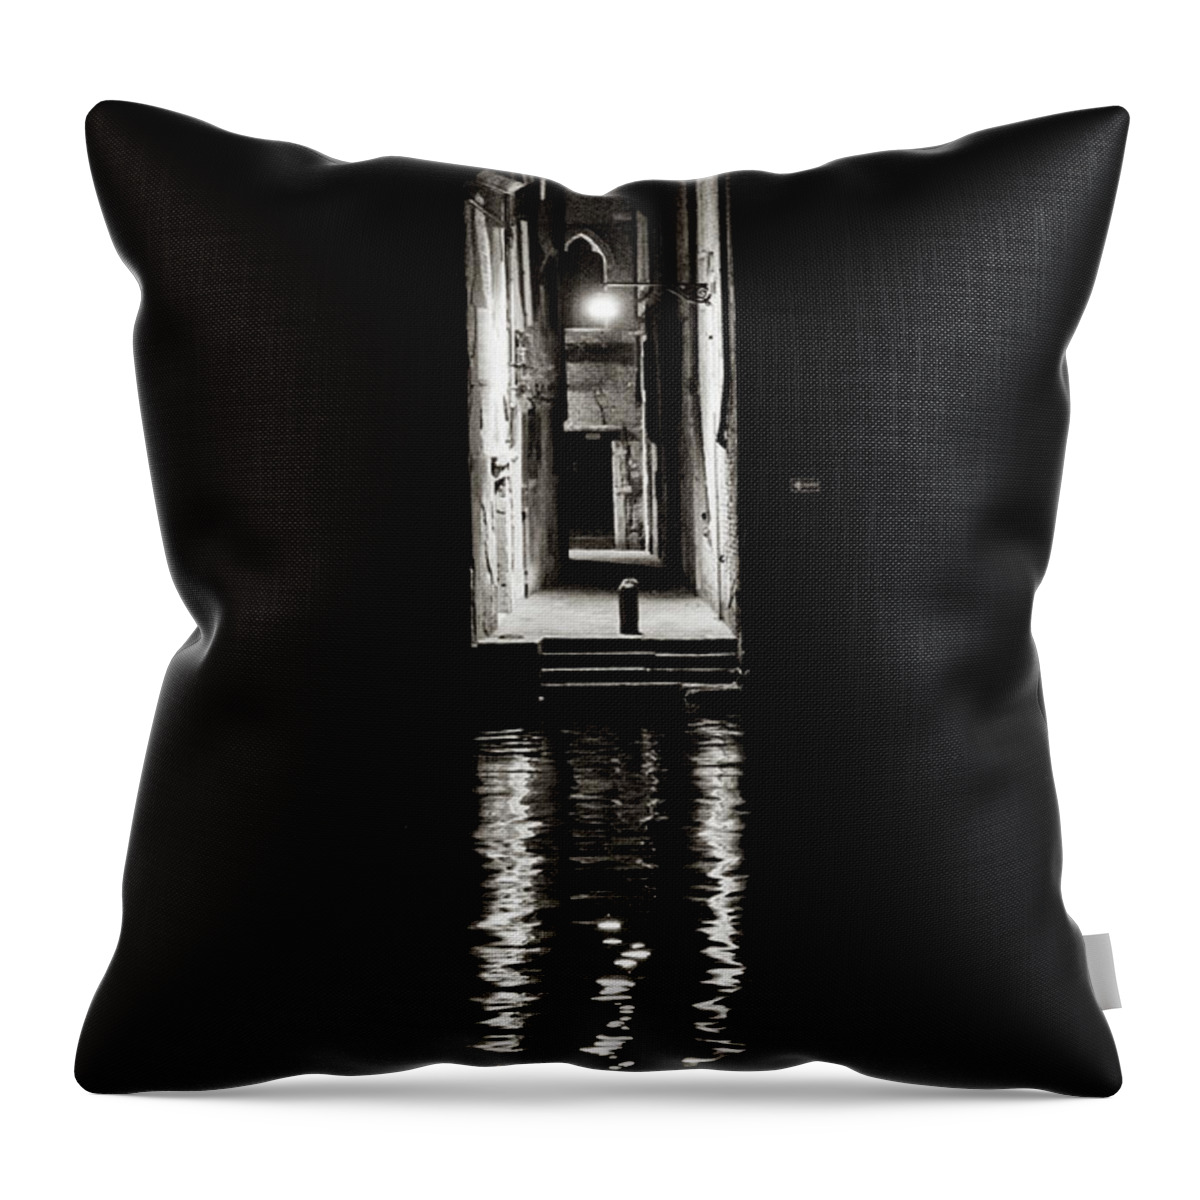 Fine Art Throw Pillow featuring the photograph Dscf2685 - Night reflections, Venice by Marco Missiaja